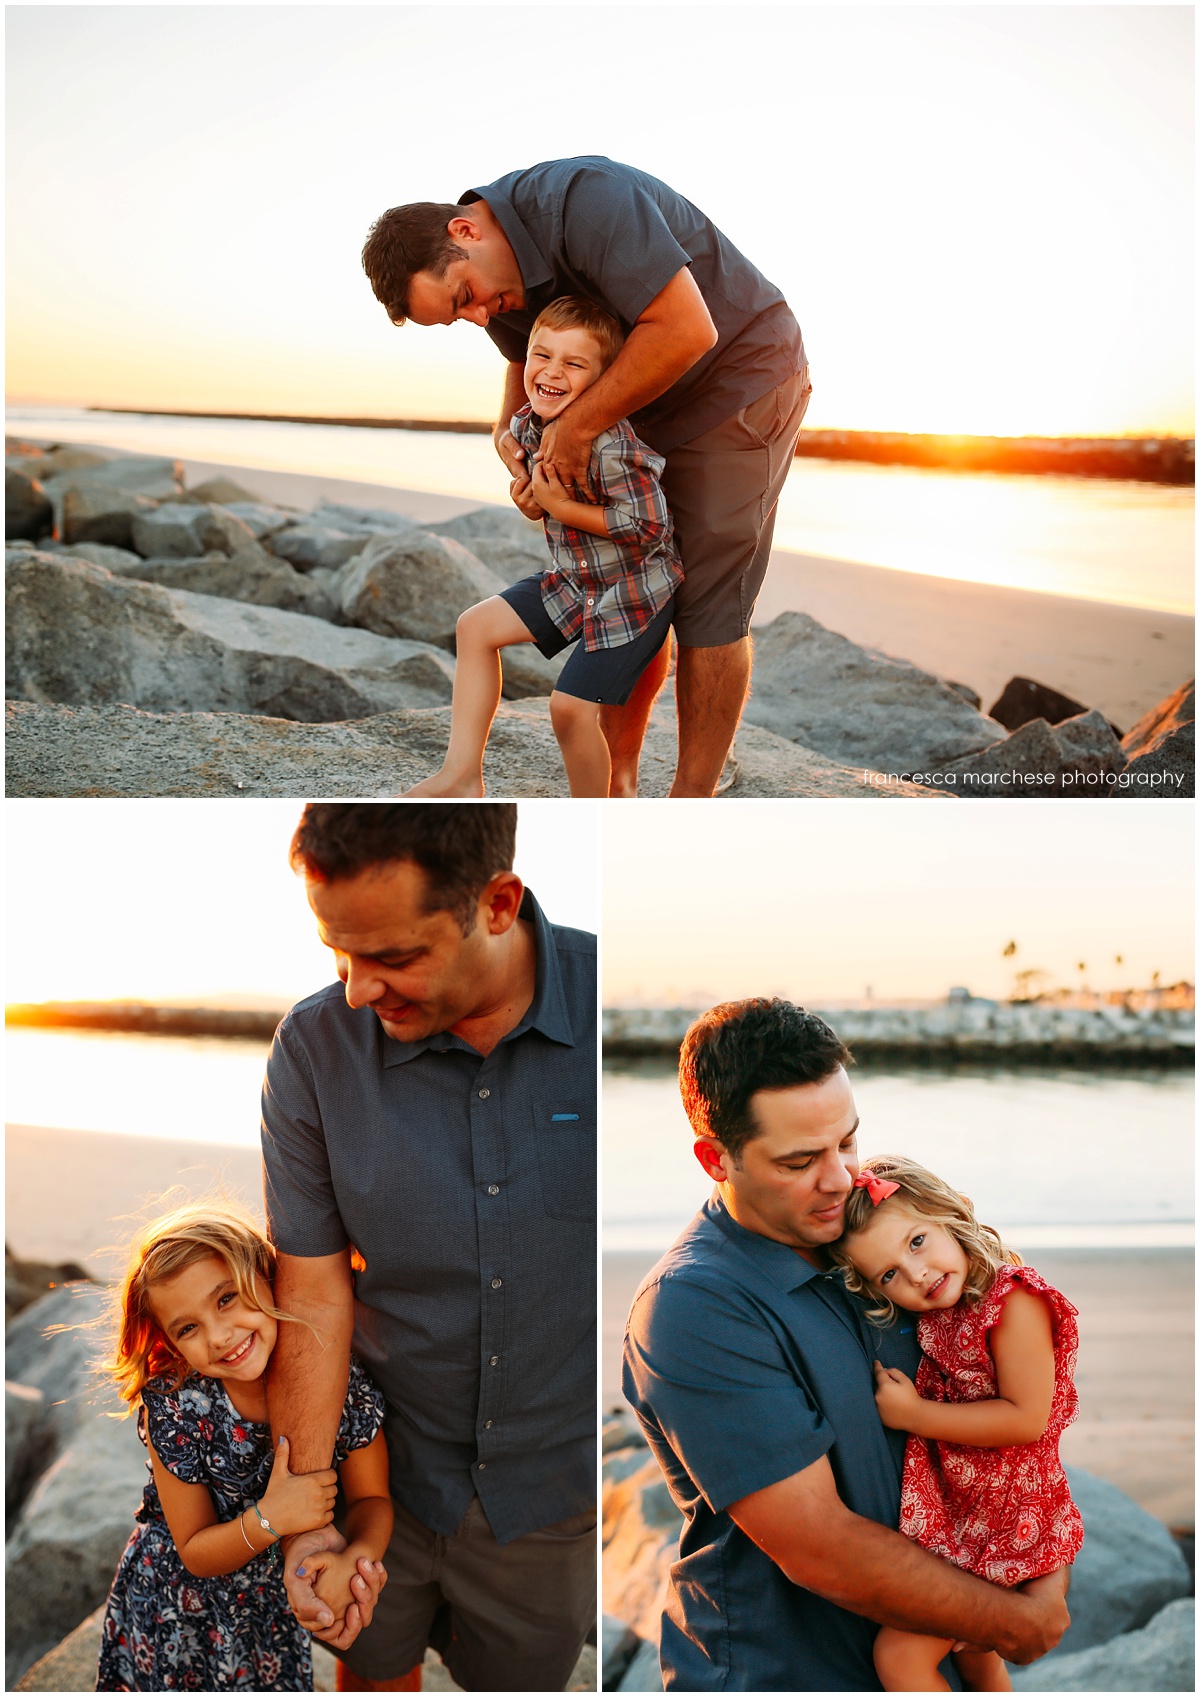 Seal Beach family sessions - Francesca Marchese Photography